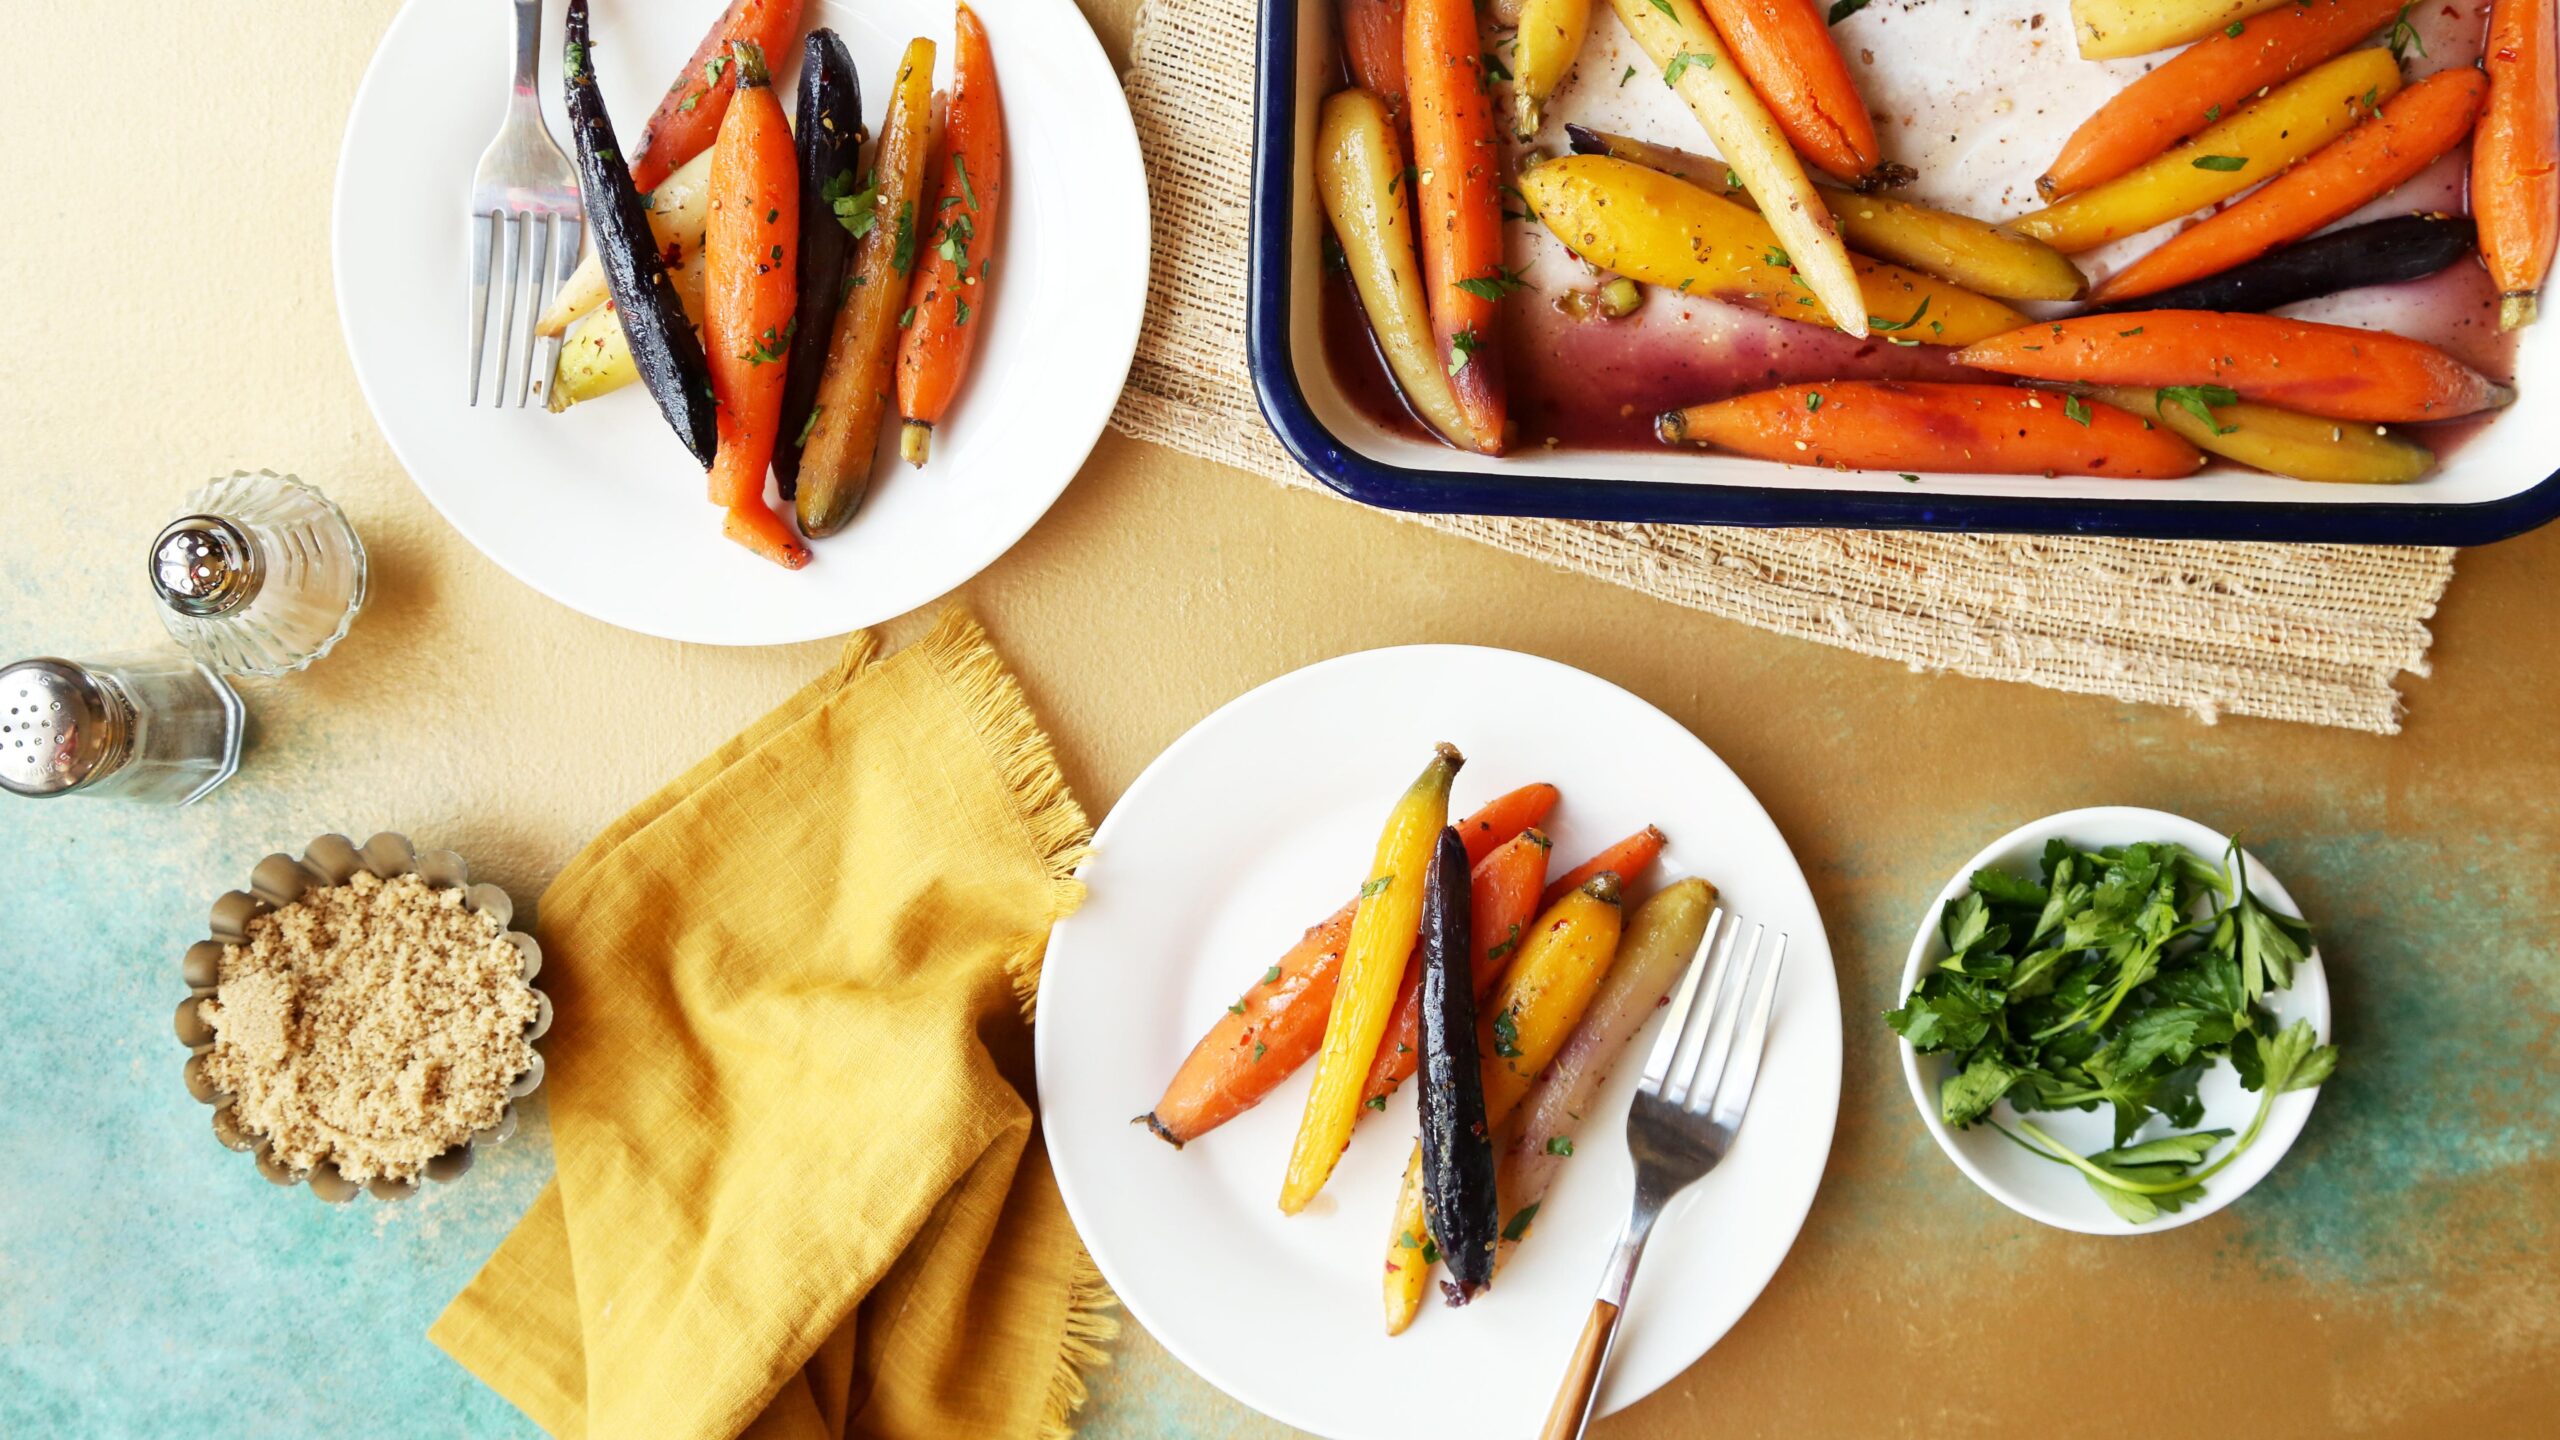  These honey roasted carrots were made in a pinch with my Instant Pot.